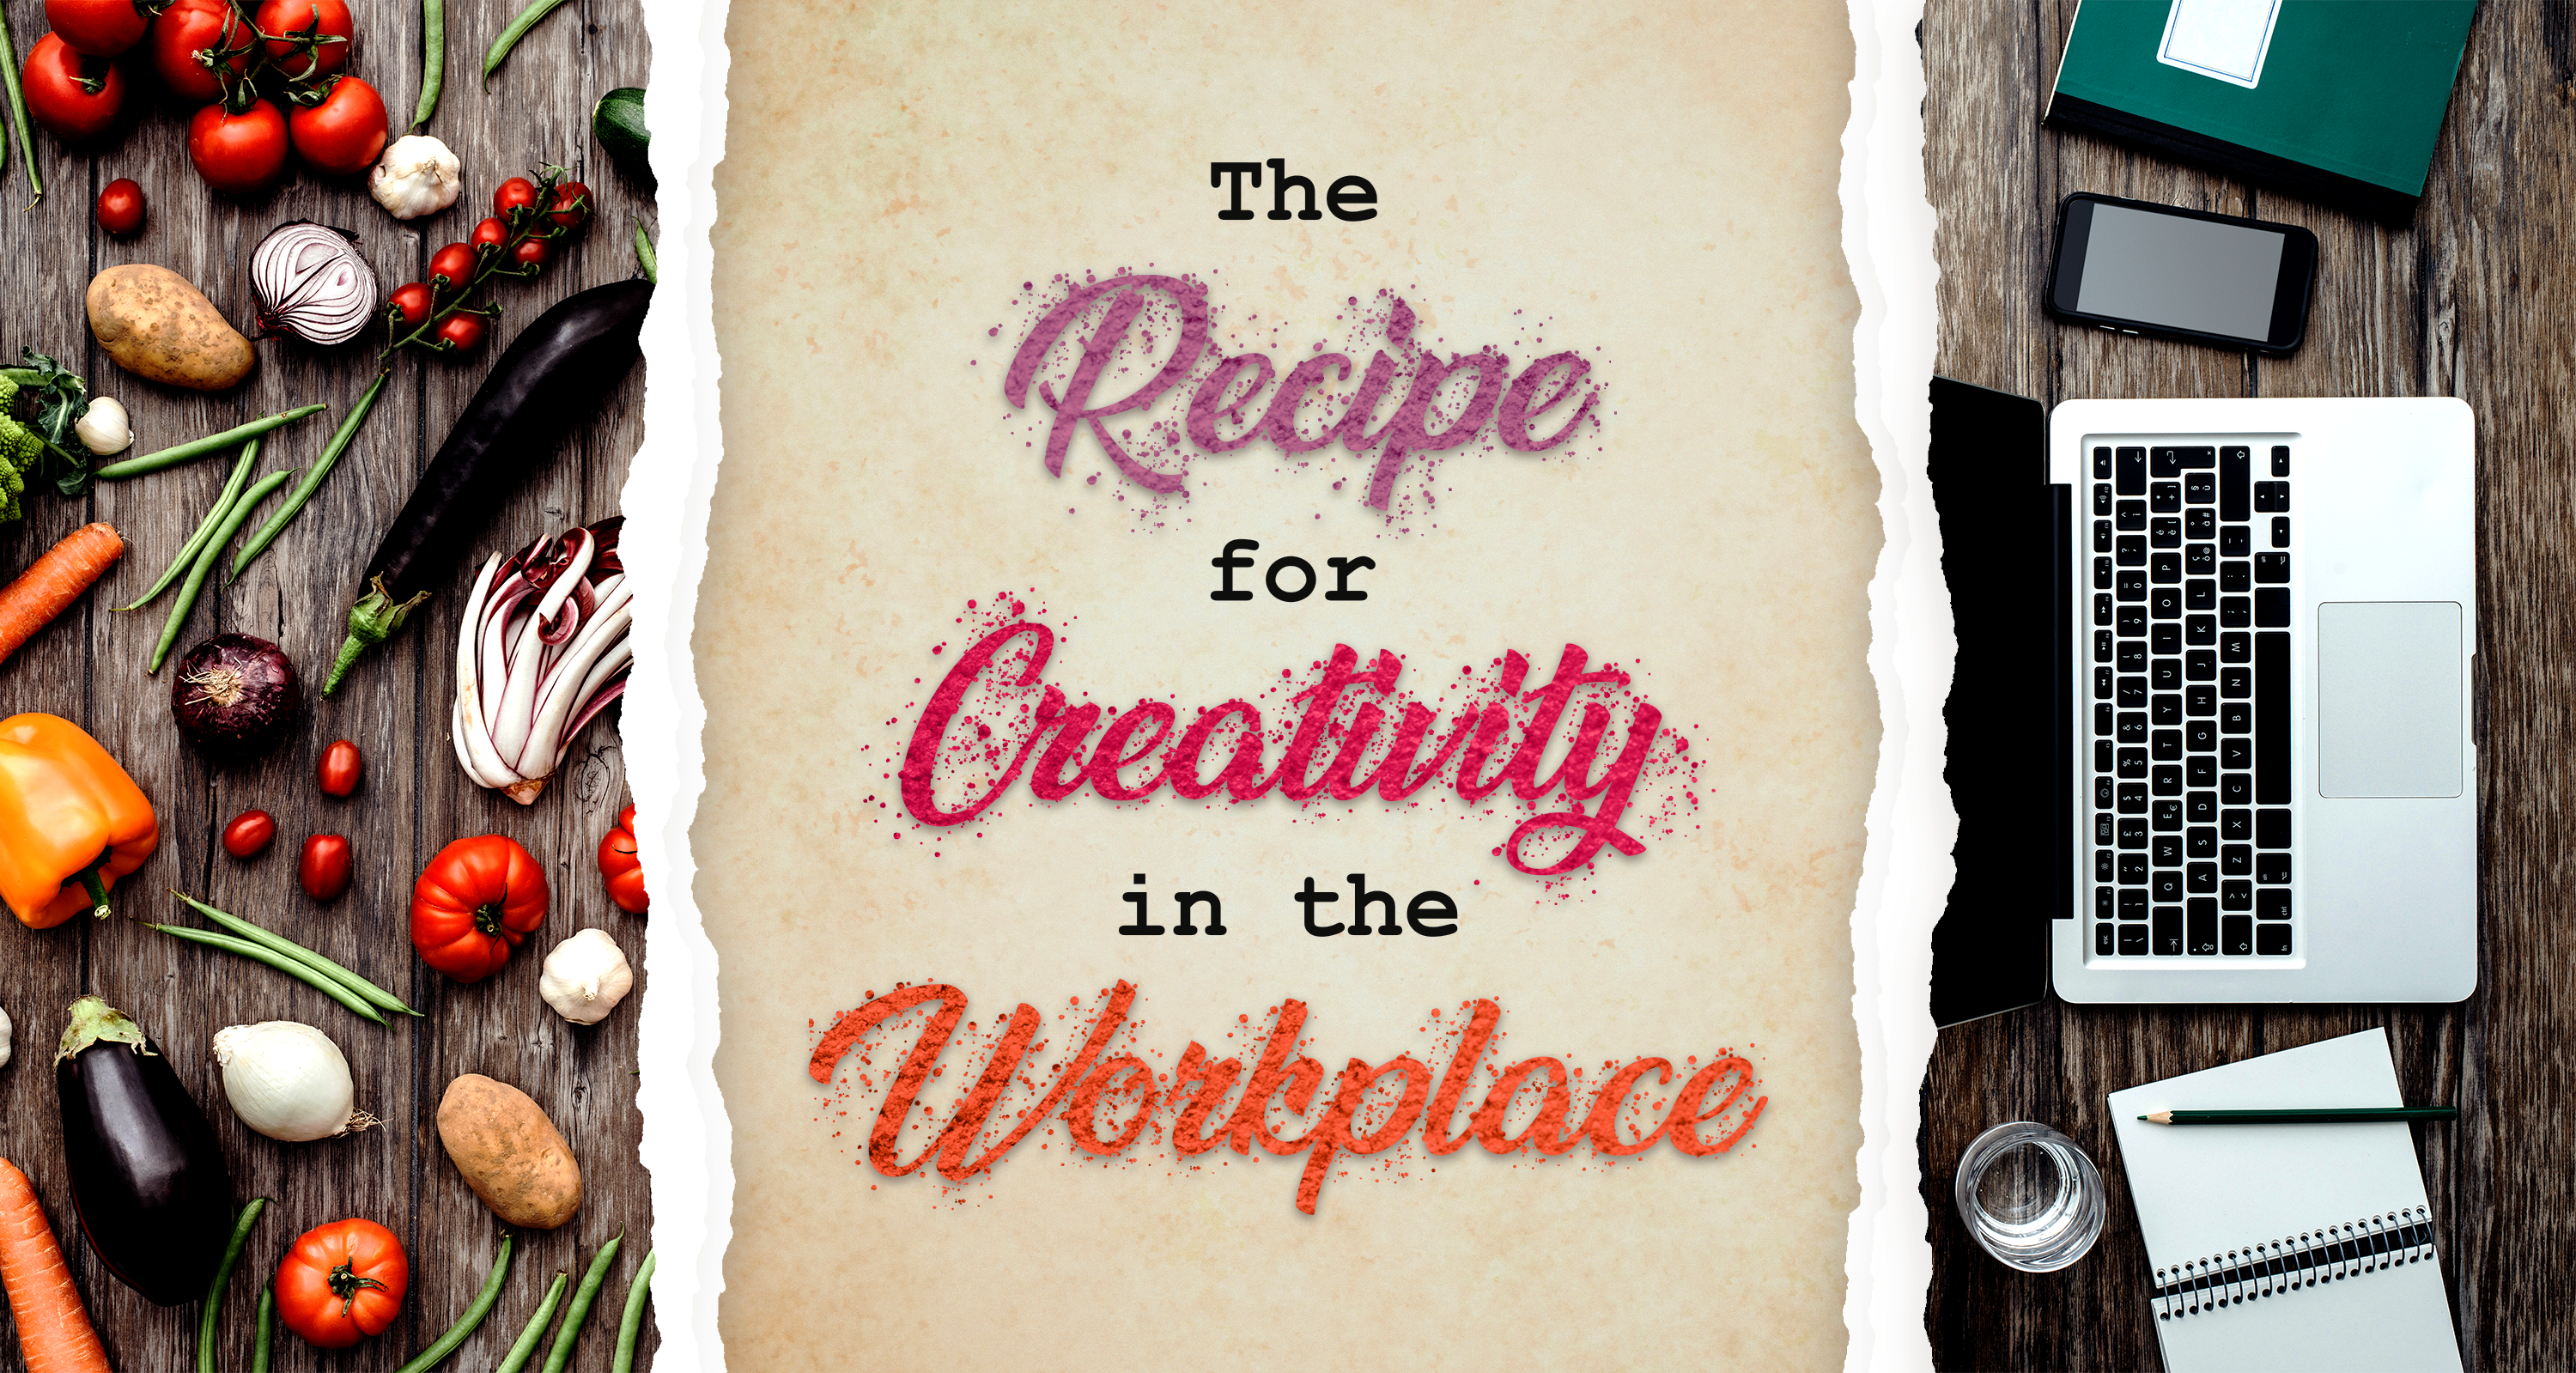 the recipe for creativity in the workplace